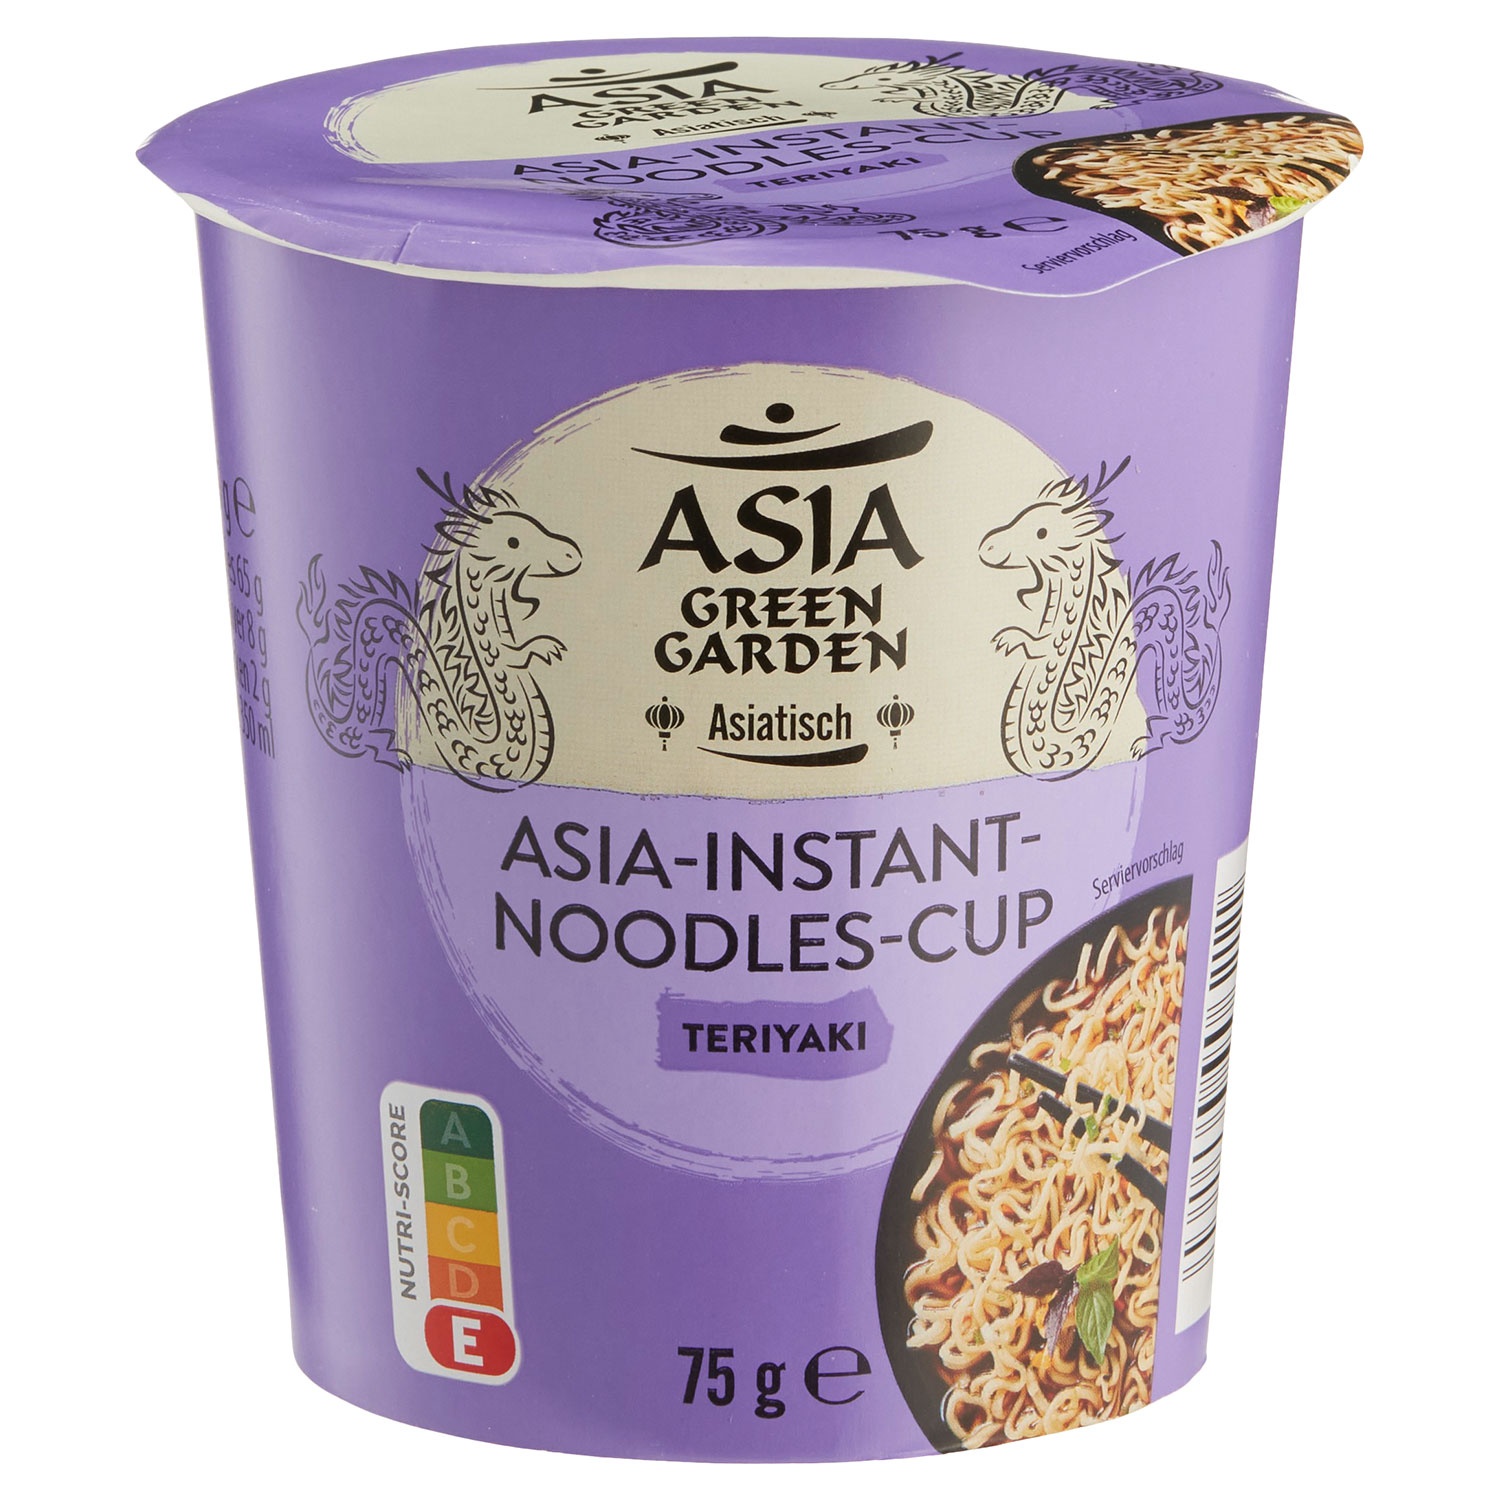 ASIA GREEN GARDEN Asia-Instant-Noodles-Cup 75 g